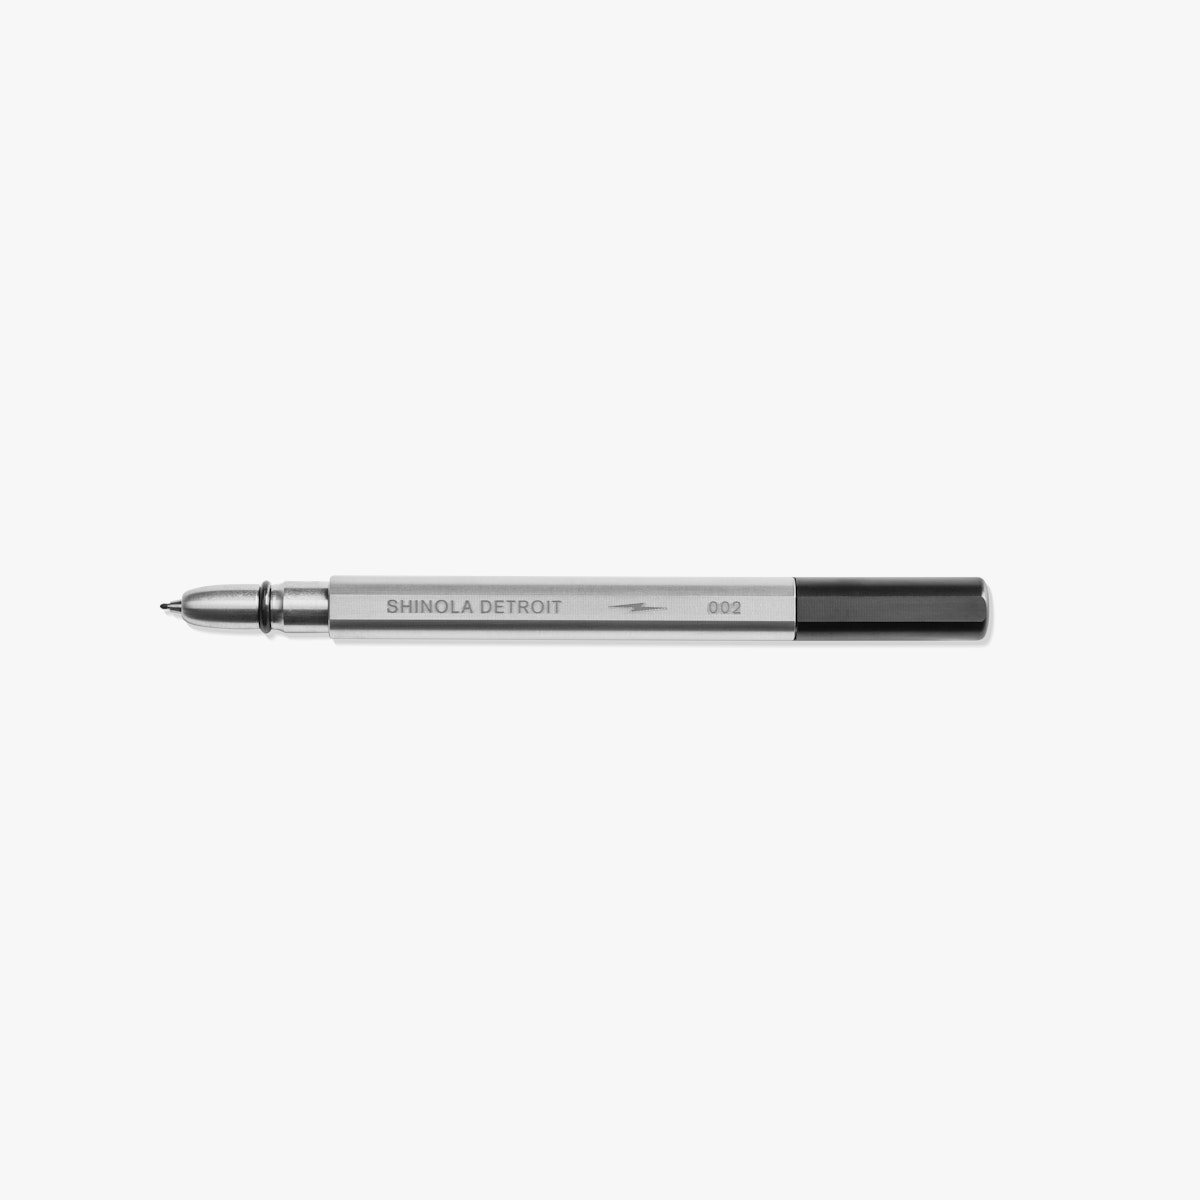 https://shinola-m2.imgix.net/images/Products/20274680-sdt-005334461/S0620274680_signature_pen_fineliner_V1_MAIN_01.png?h=1200&w=1200&bg=f7f7f7&q=80&auto=format,compress&fit=fillmax